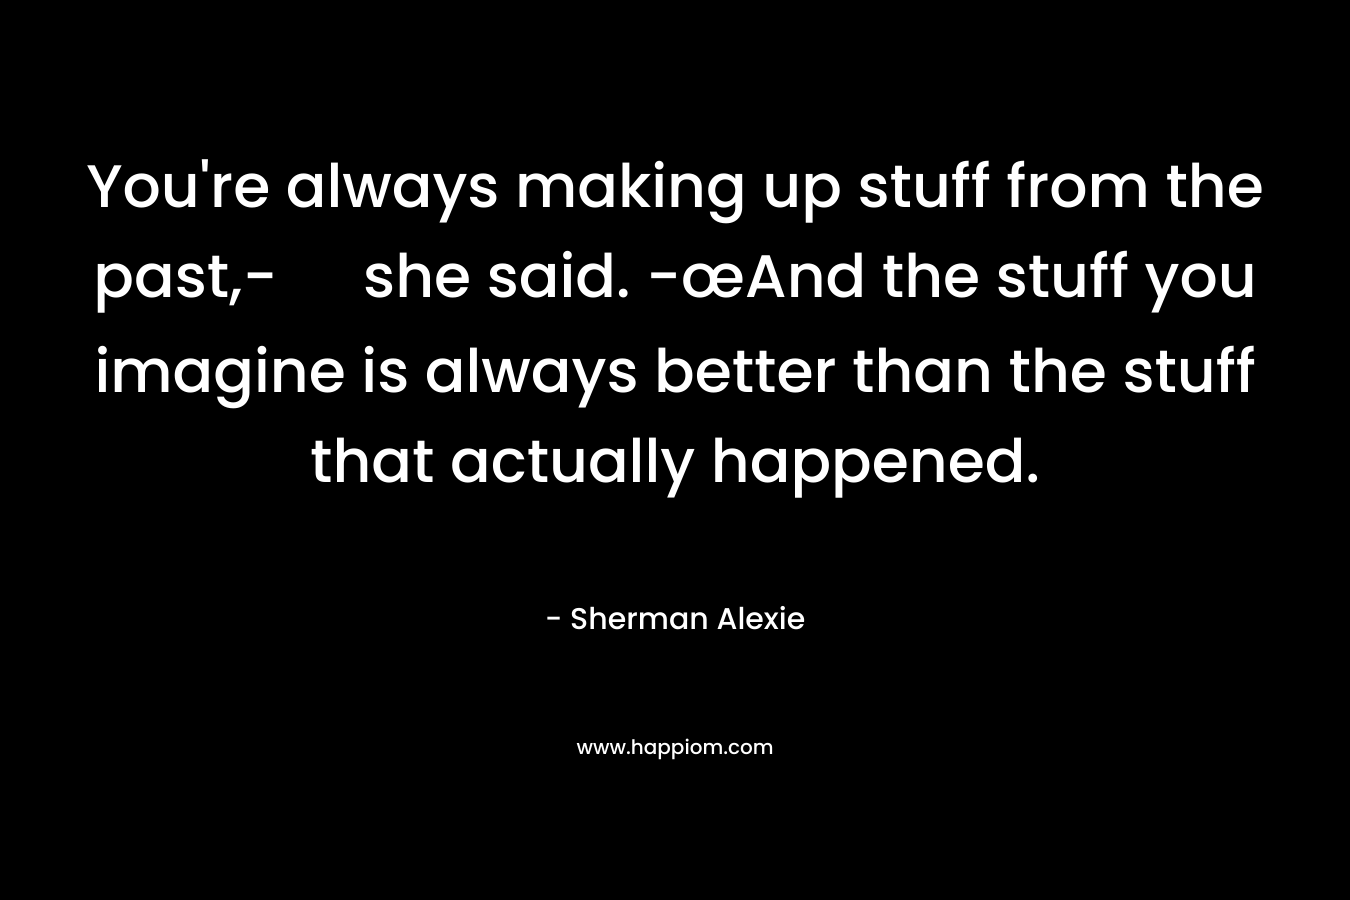 You’re always making up stuff from the past,- she said. -œAnd the stuff you imagine is always better than the stuff that actually happened. – Sherman Alexie